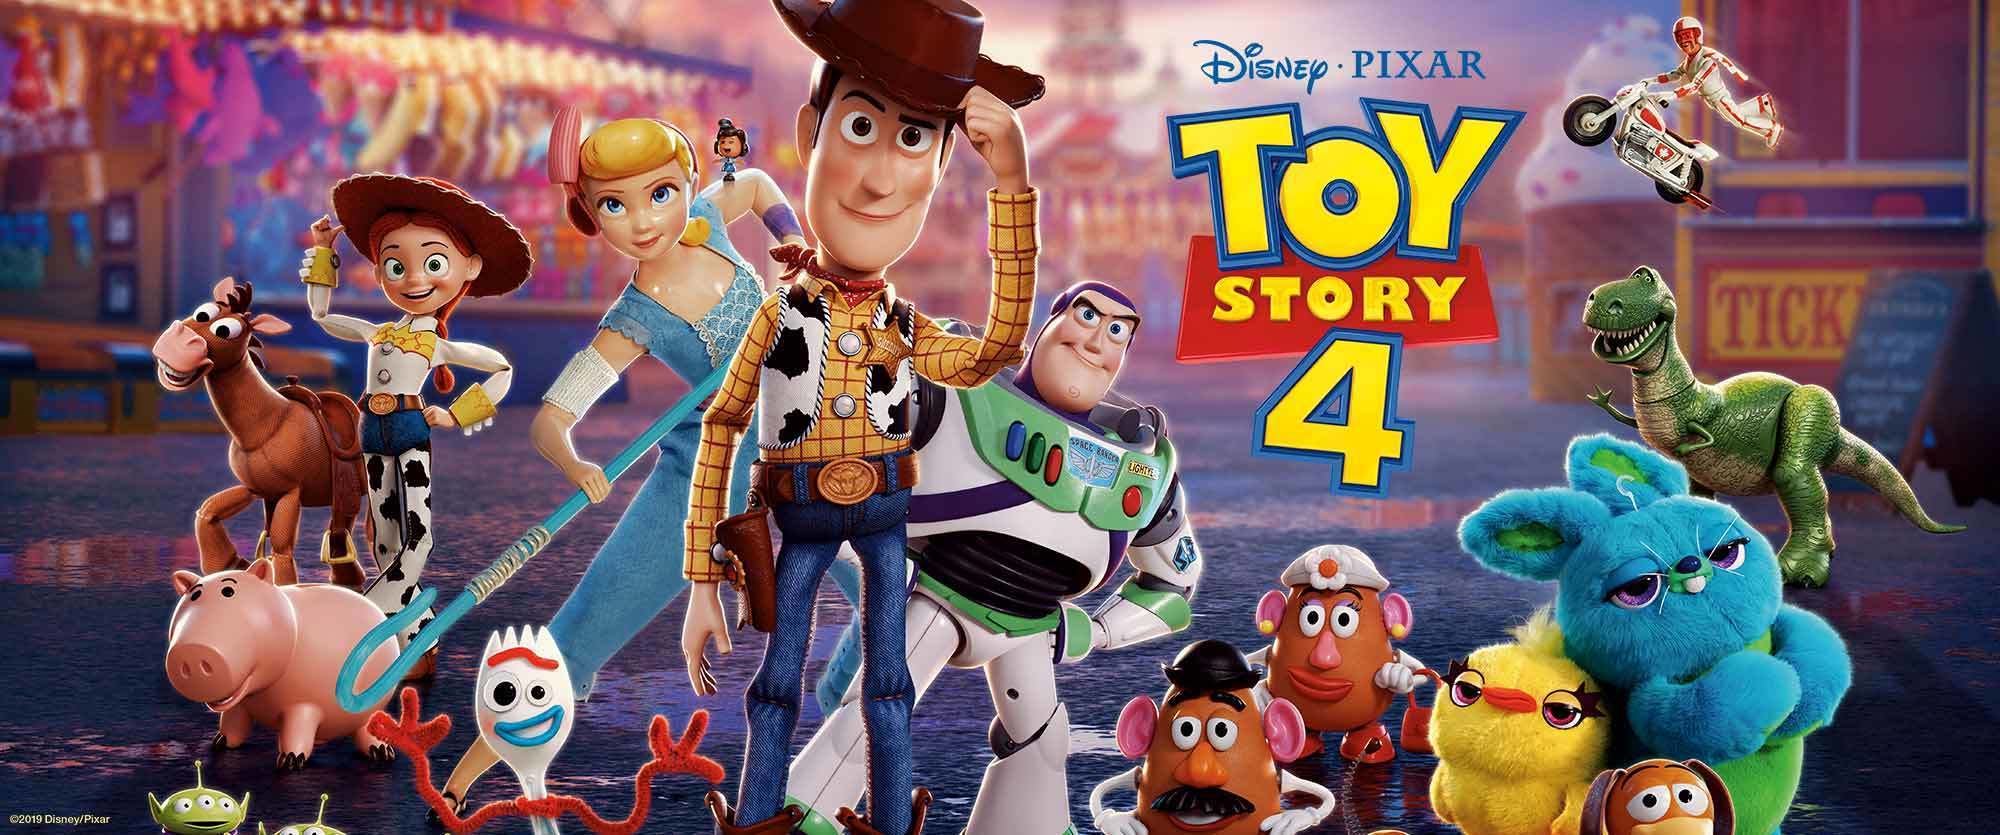 Toy Story 4_Movie Page_Hero Banner